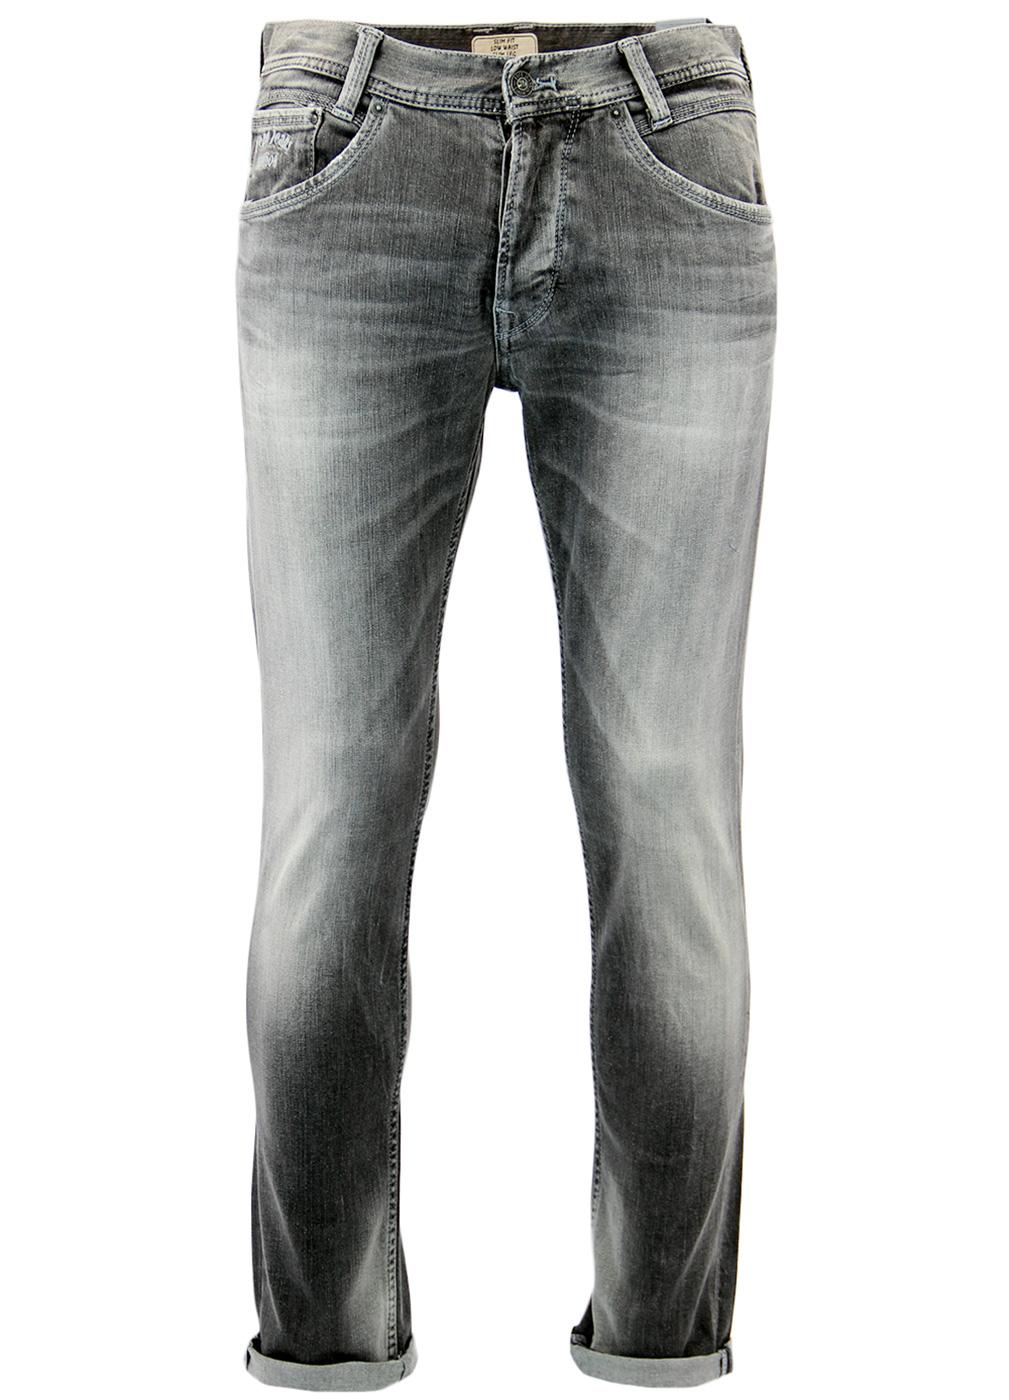 PEPE JEANS Spike Retro Mod Slim Tapered Fit Jeans in Grey